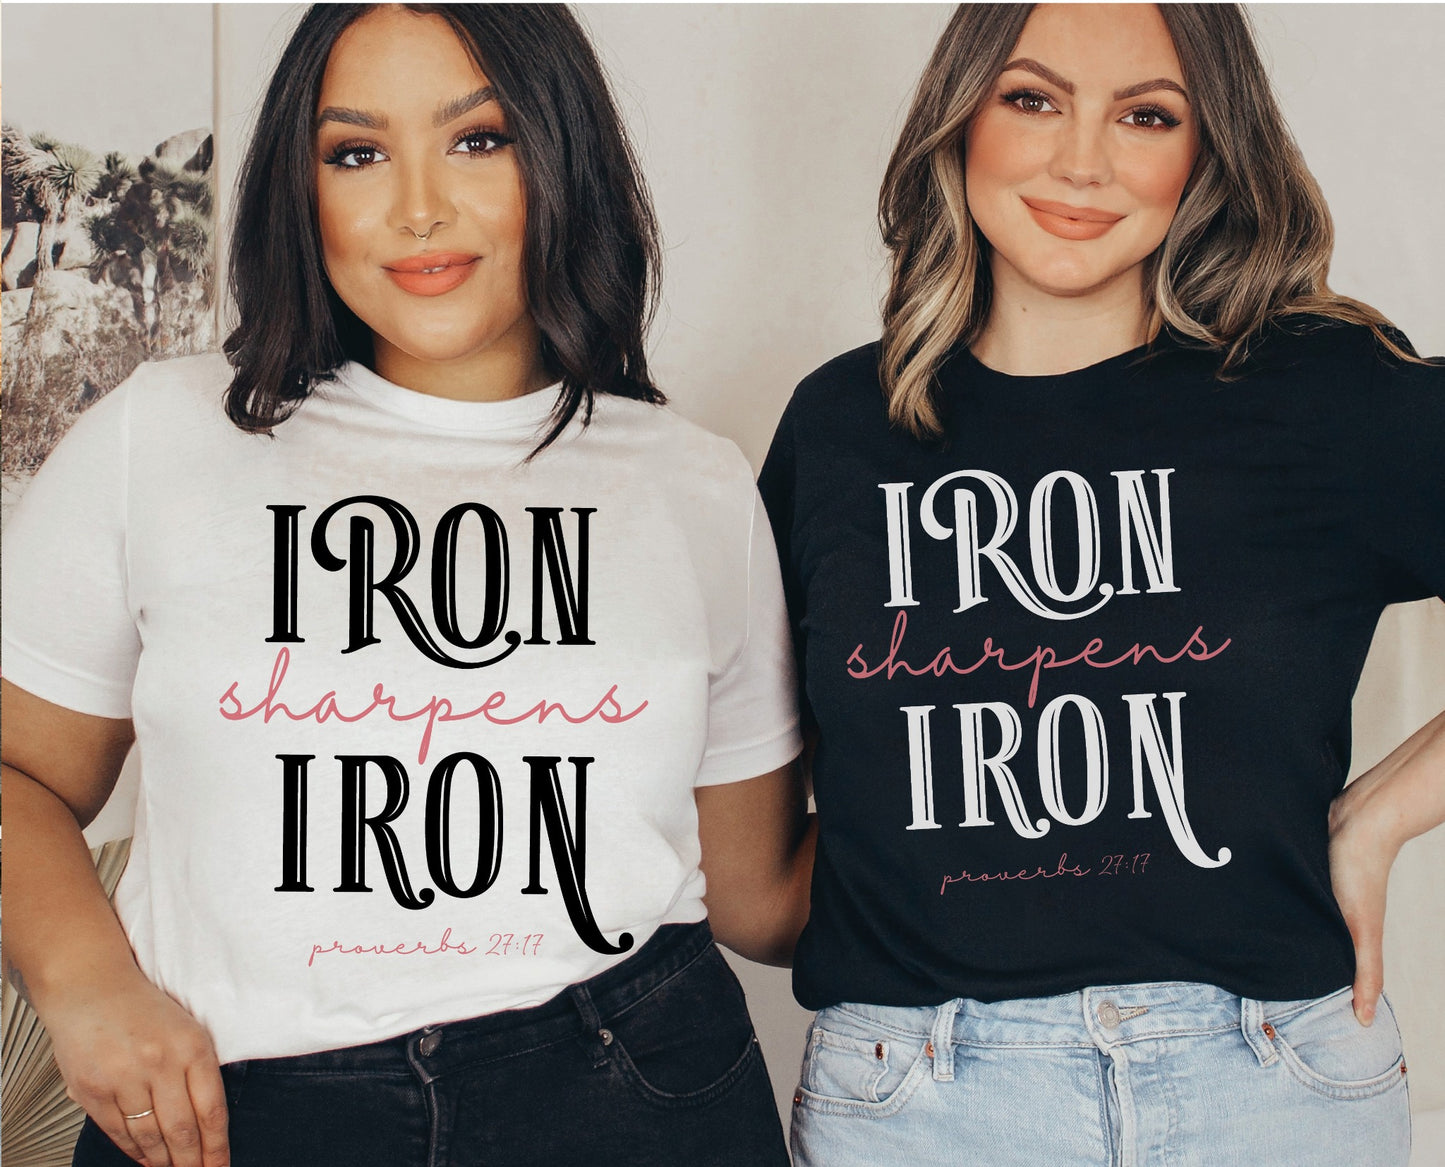 Iron Sharpens Iron Proverbs 27:17 Christian aesthetic design printed in white and mauve on ladies soft unisex t-shirt for women's groups